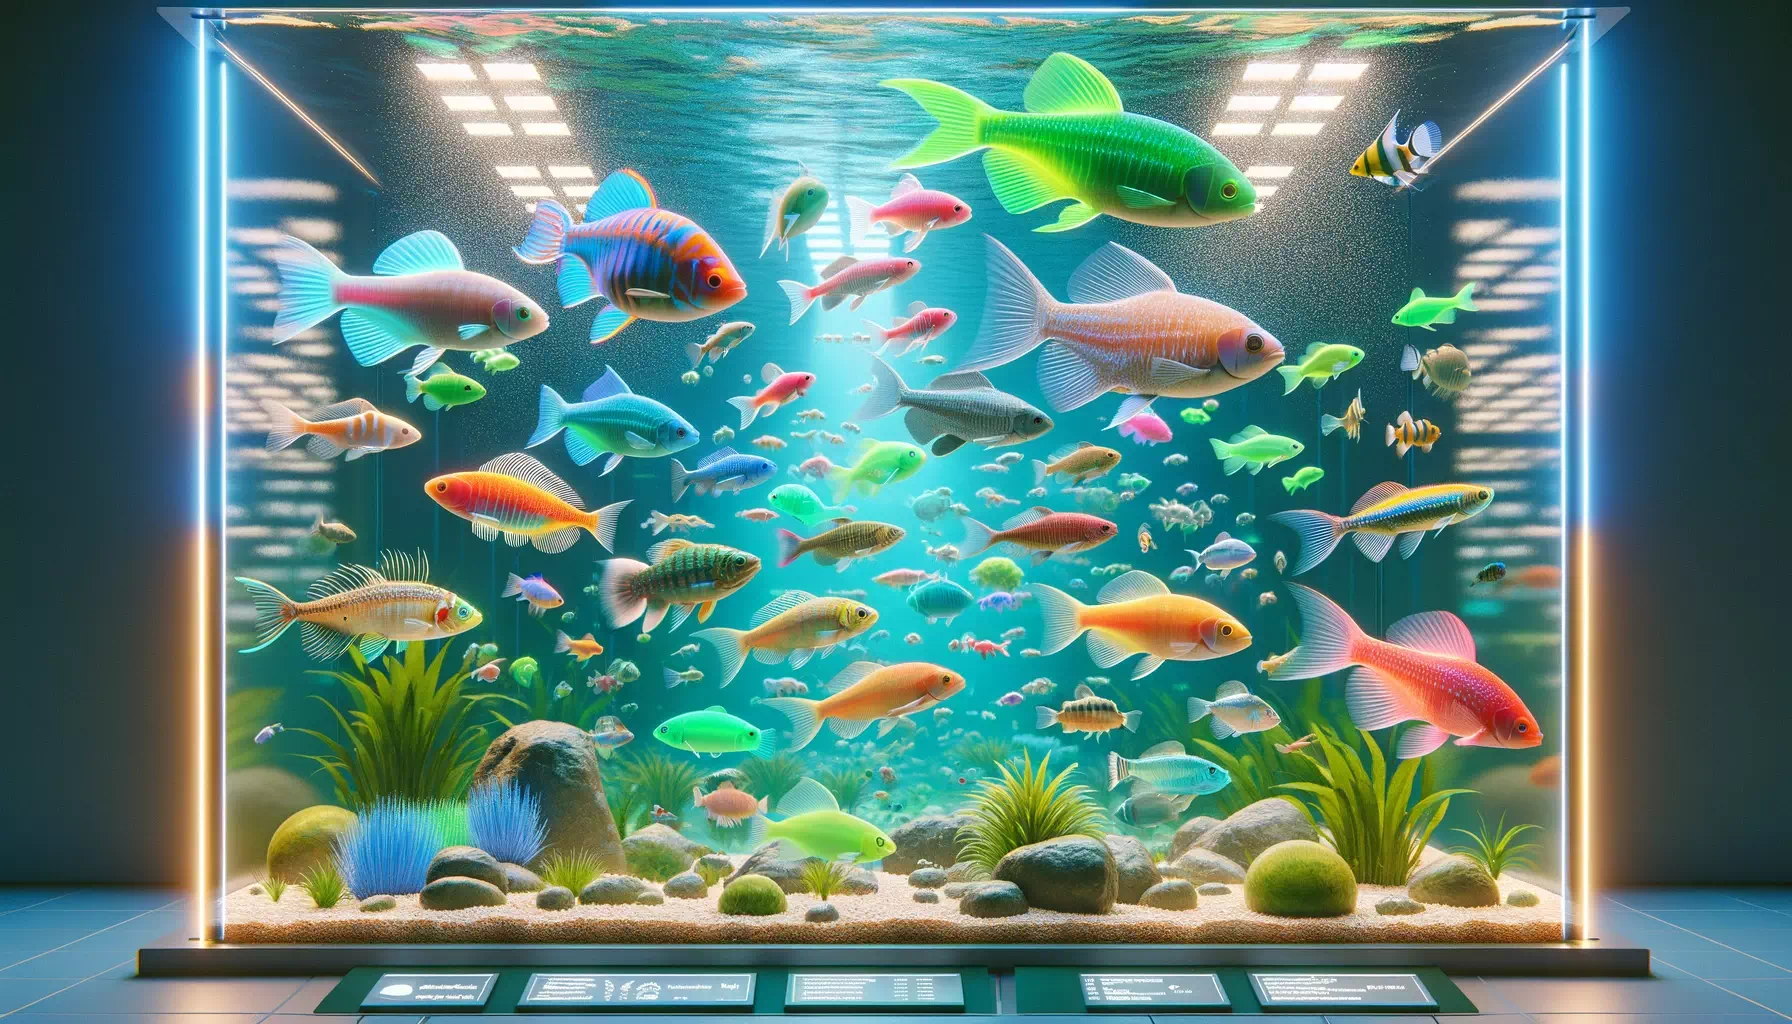 illustrating a variety of GloFish species in a large, well-lit aquarium. Showcase different species of GloFish, each w